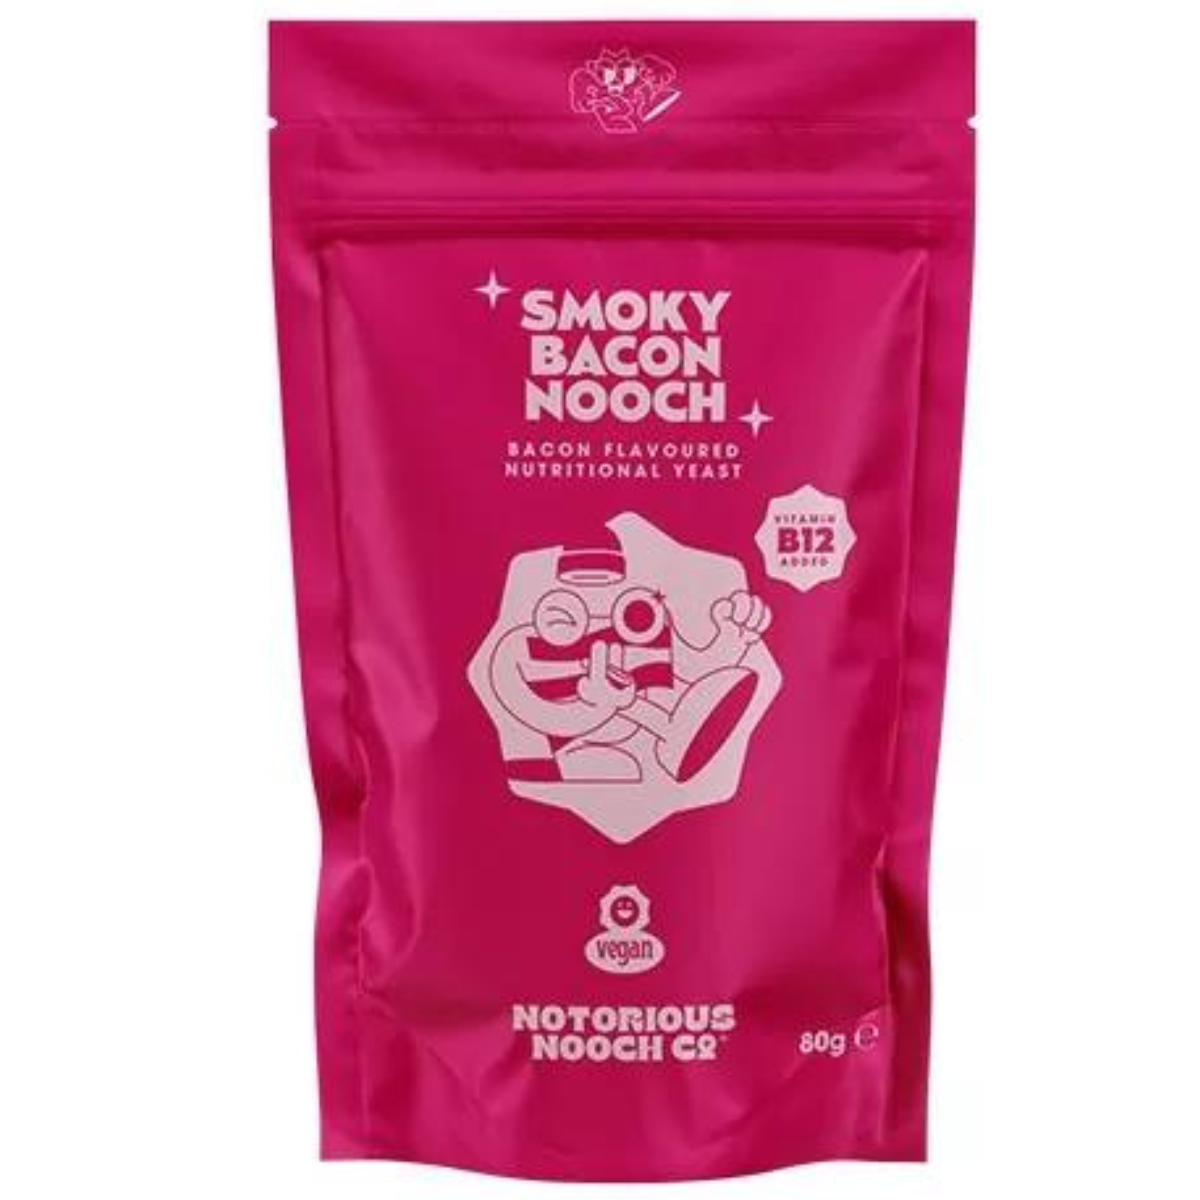 Notorious Nooch Nutritional Yeast with B12 Smoky Bacon - 80g